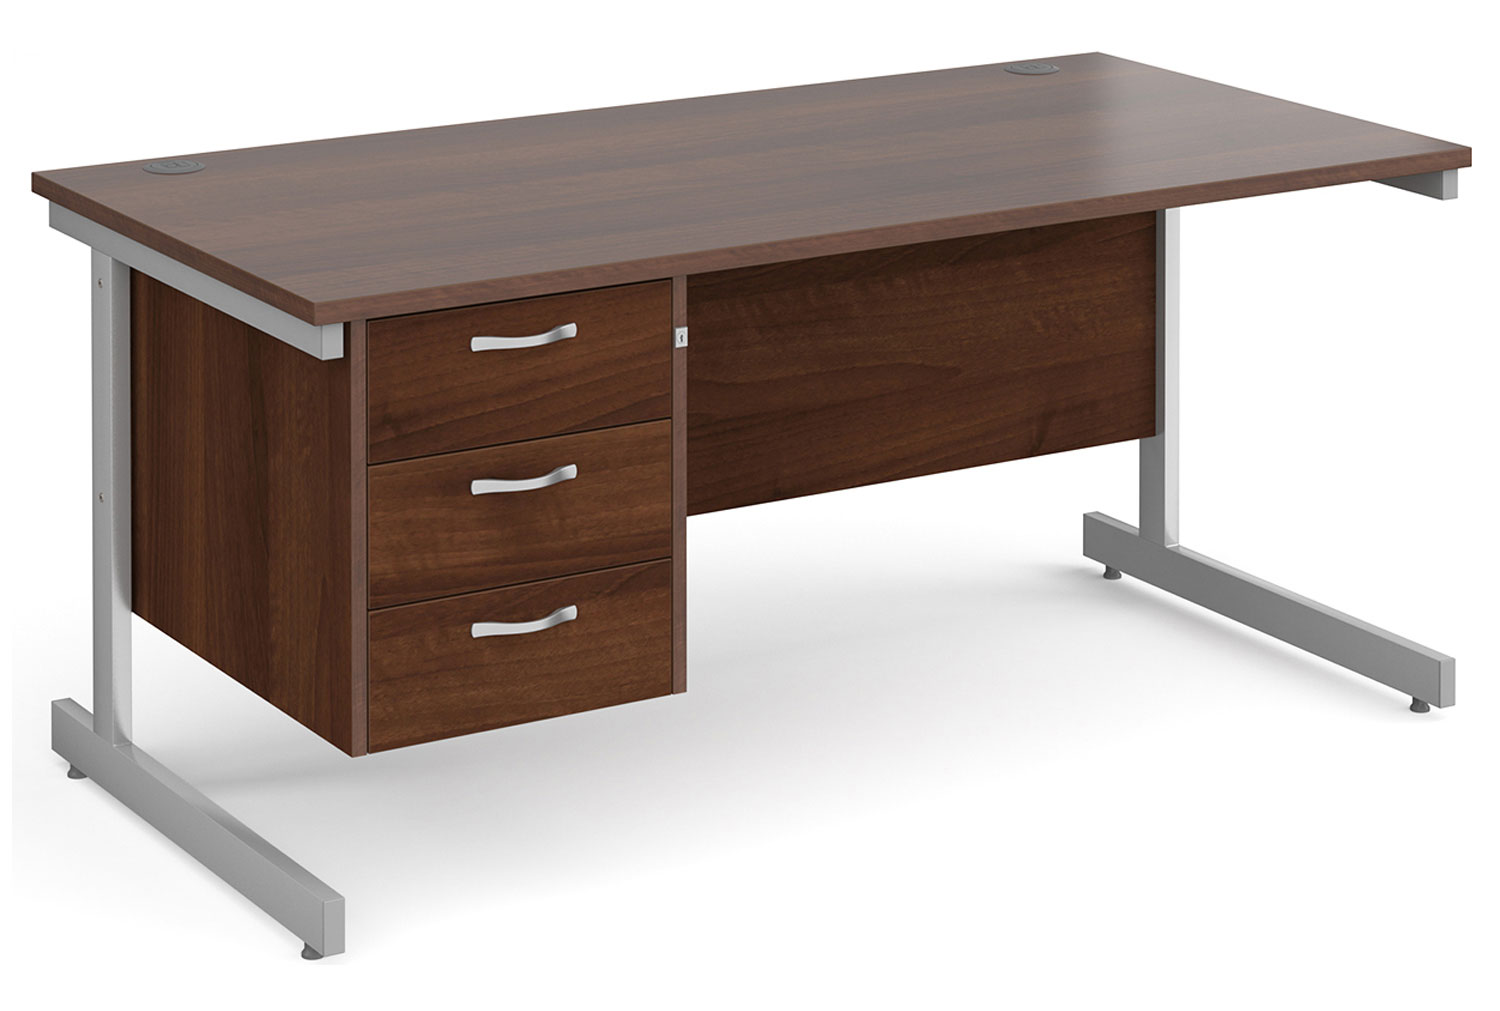 All Walnut C-Leg Clerical Office, Office Desk 3 Drawer, 160wx80dx73h (cm), Express Delivery